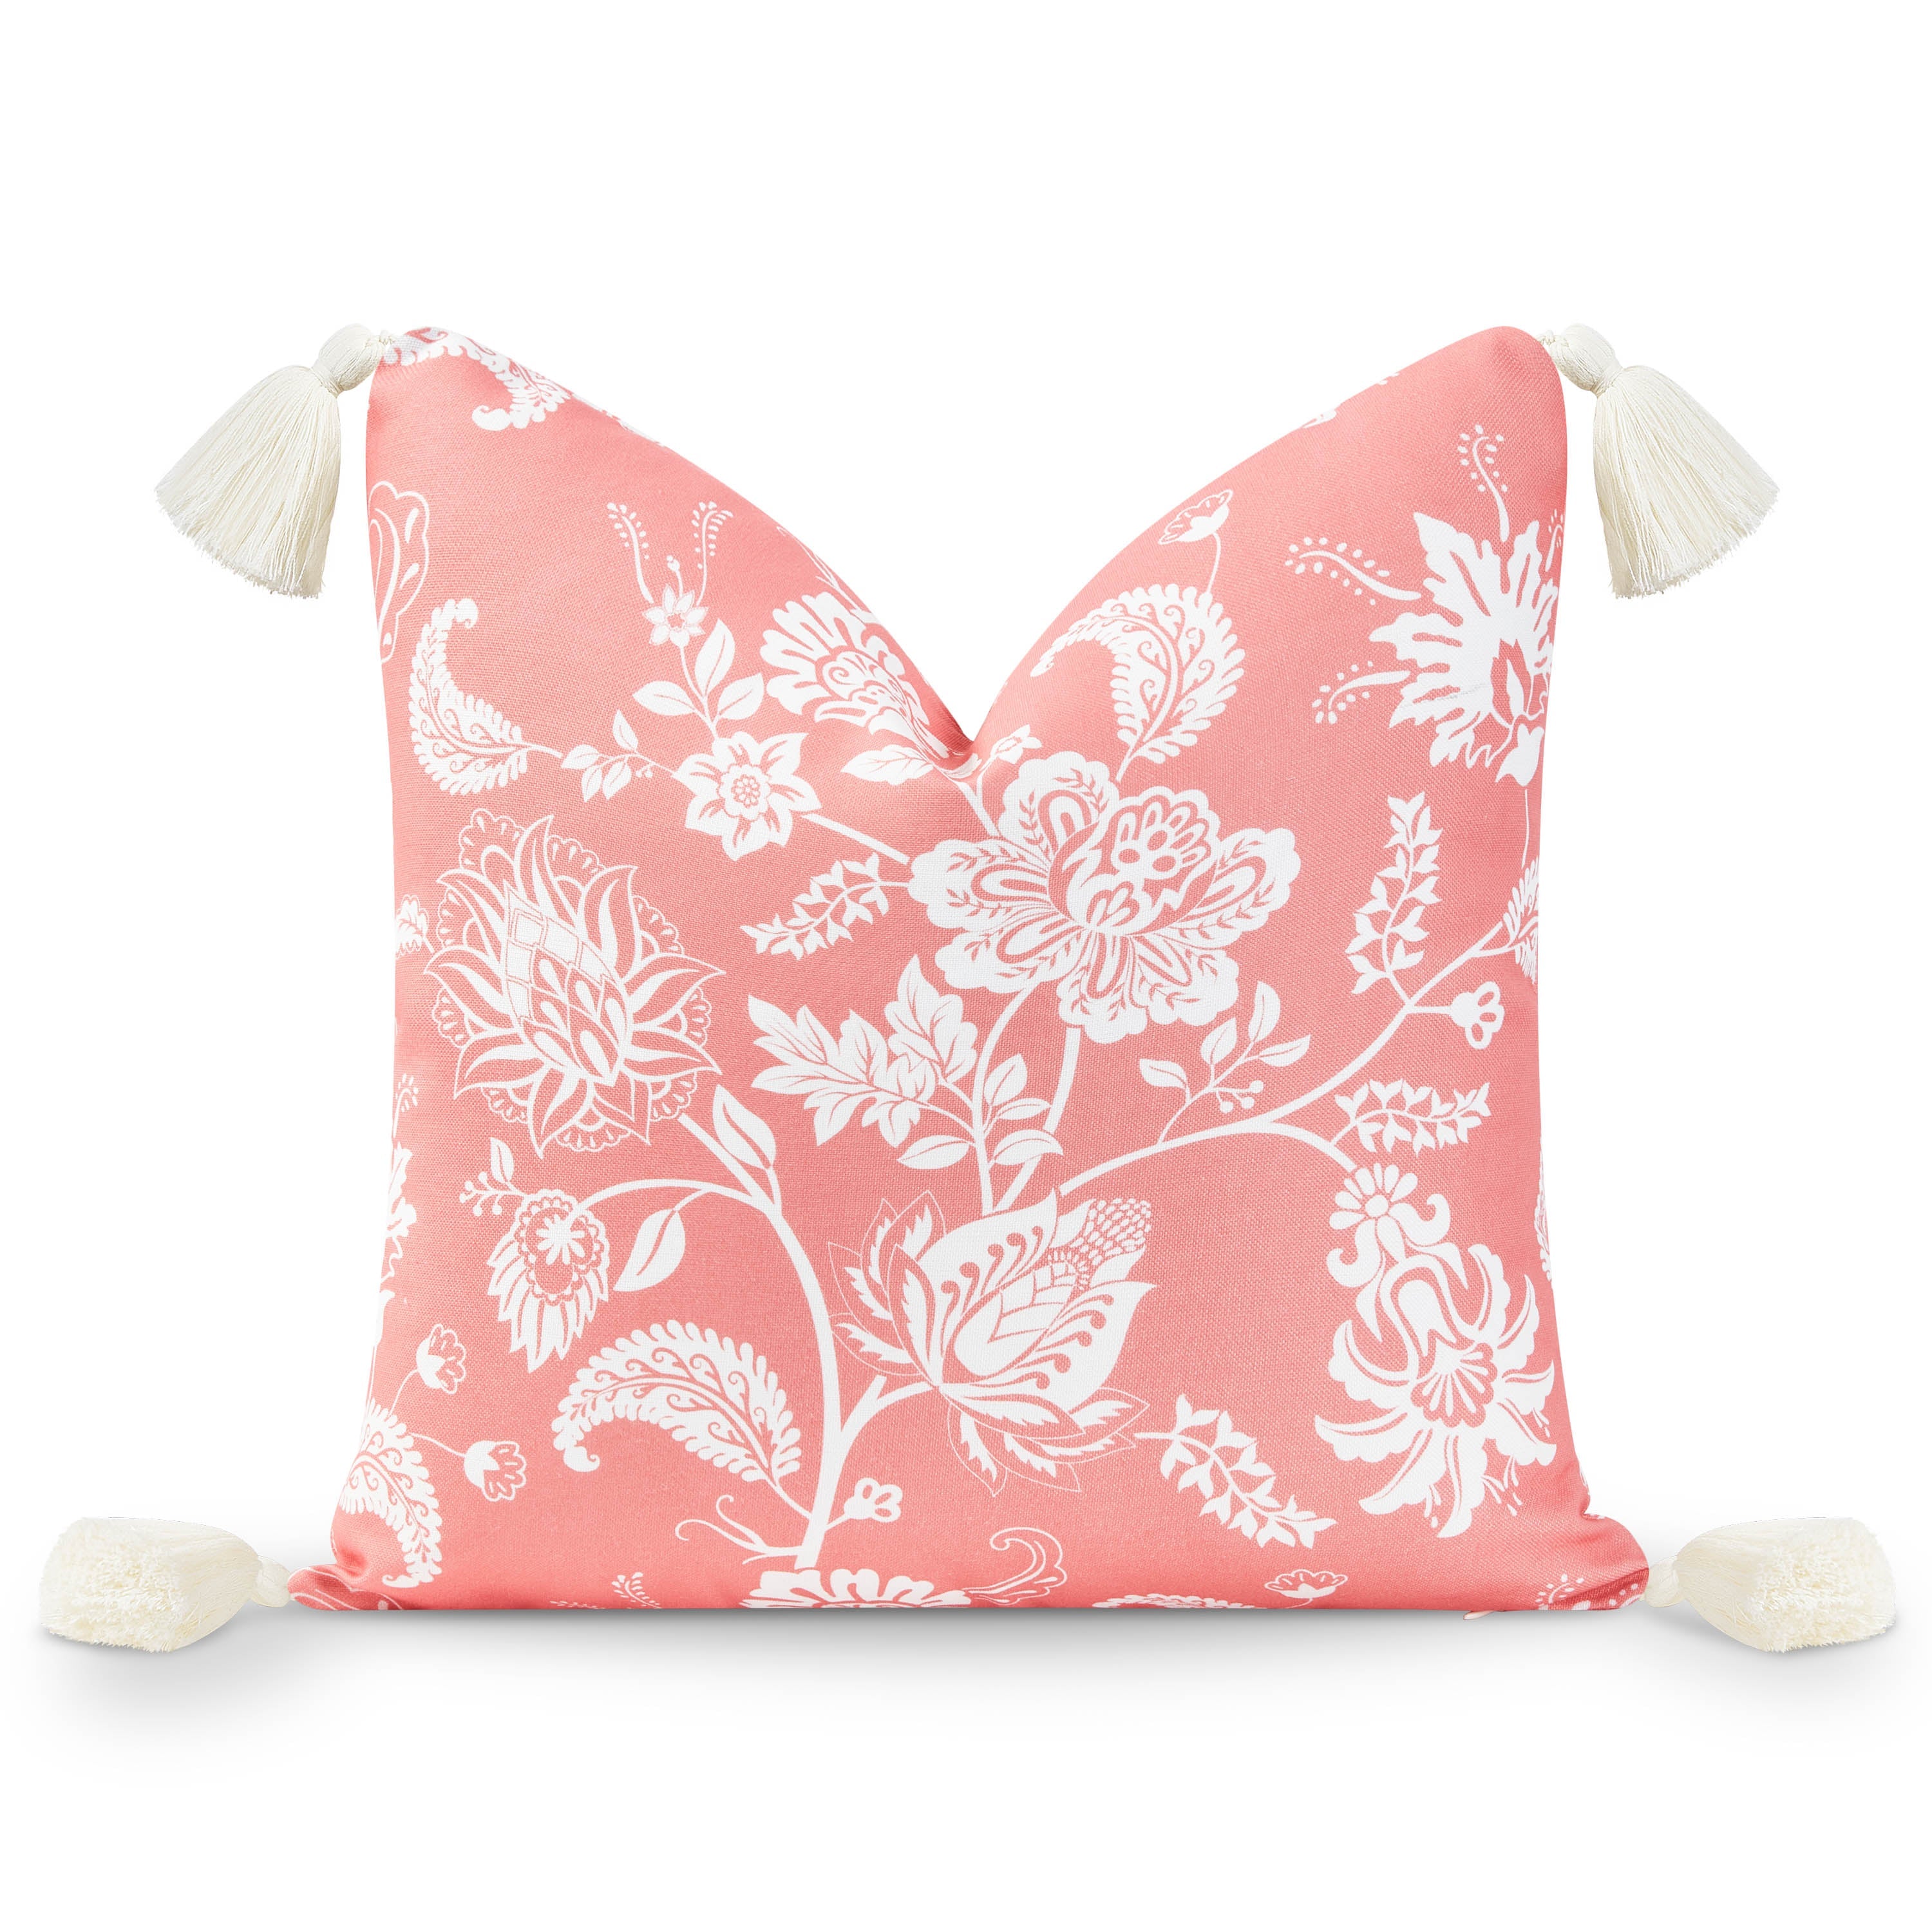 Coastal Indoor Outdoor Throw Pillow Cover, Floral Tassel, Coral Pink, 18"x18"-0